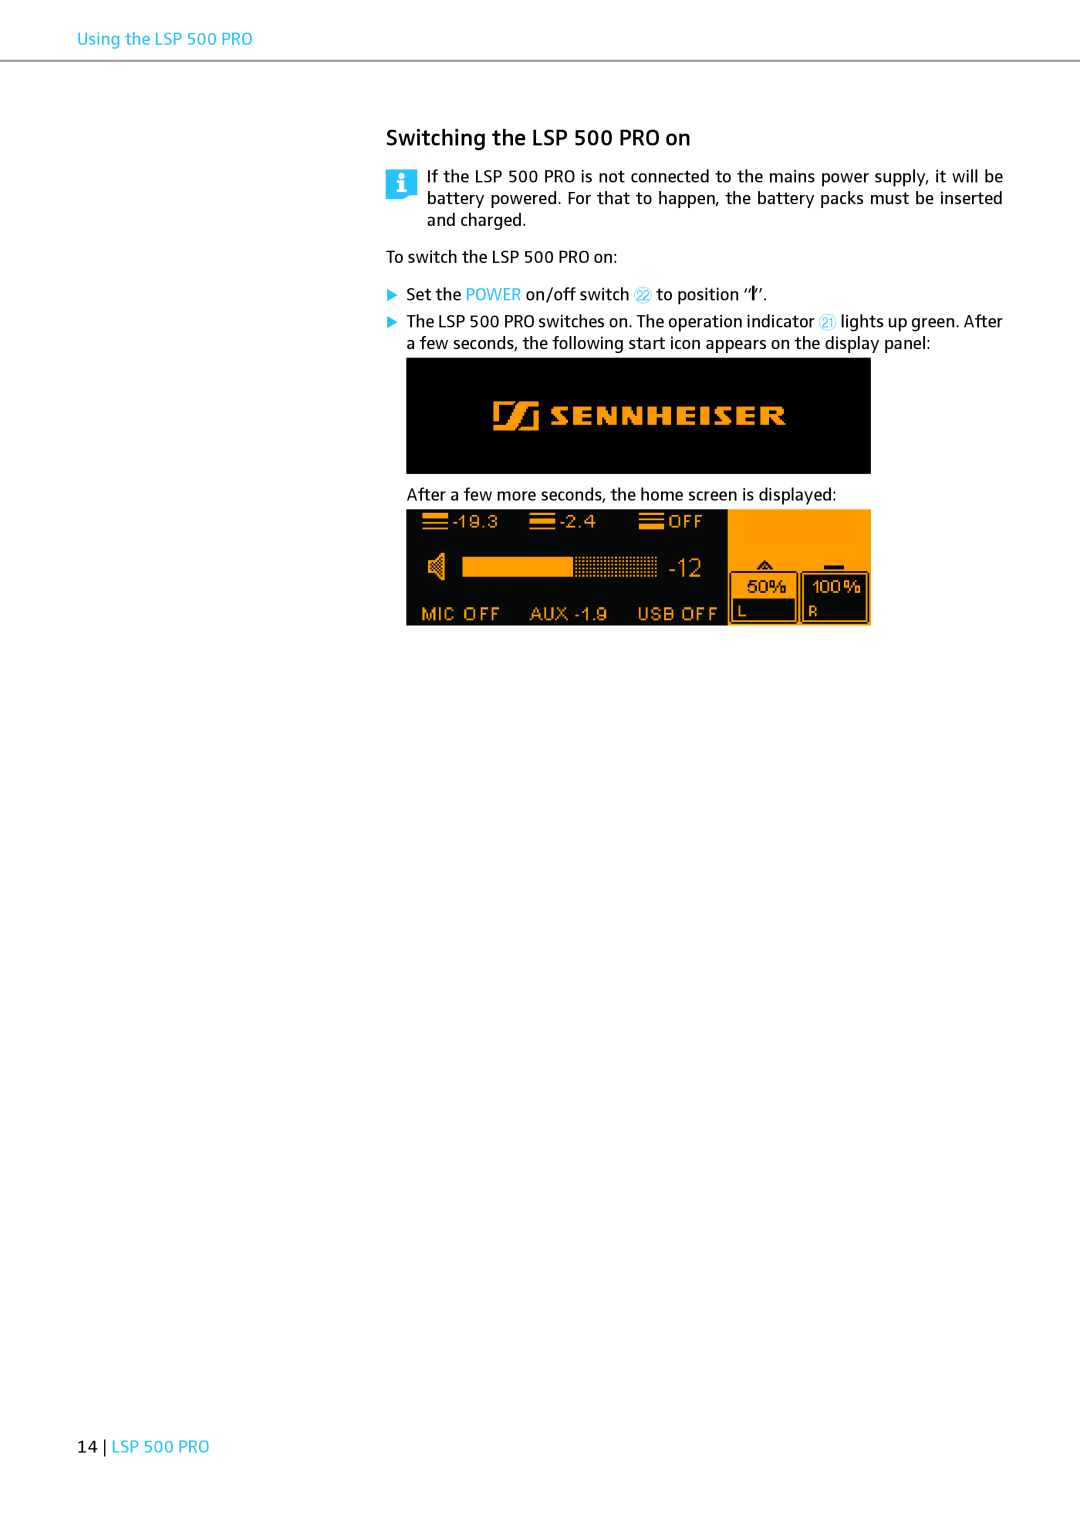 Sennheiser instruction manual Switching the LSP 500 PRO on, Using the LSP 500 PRO 